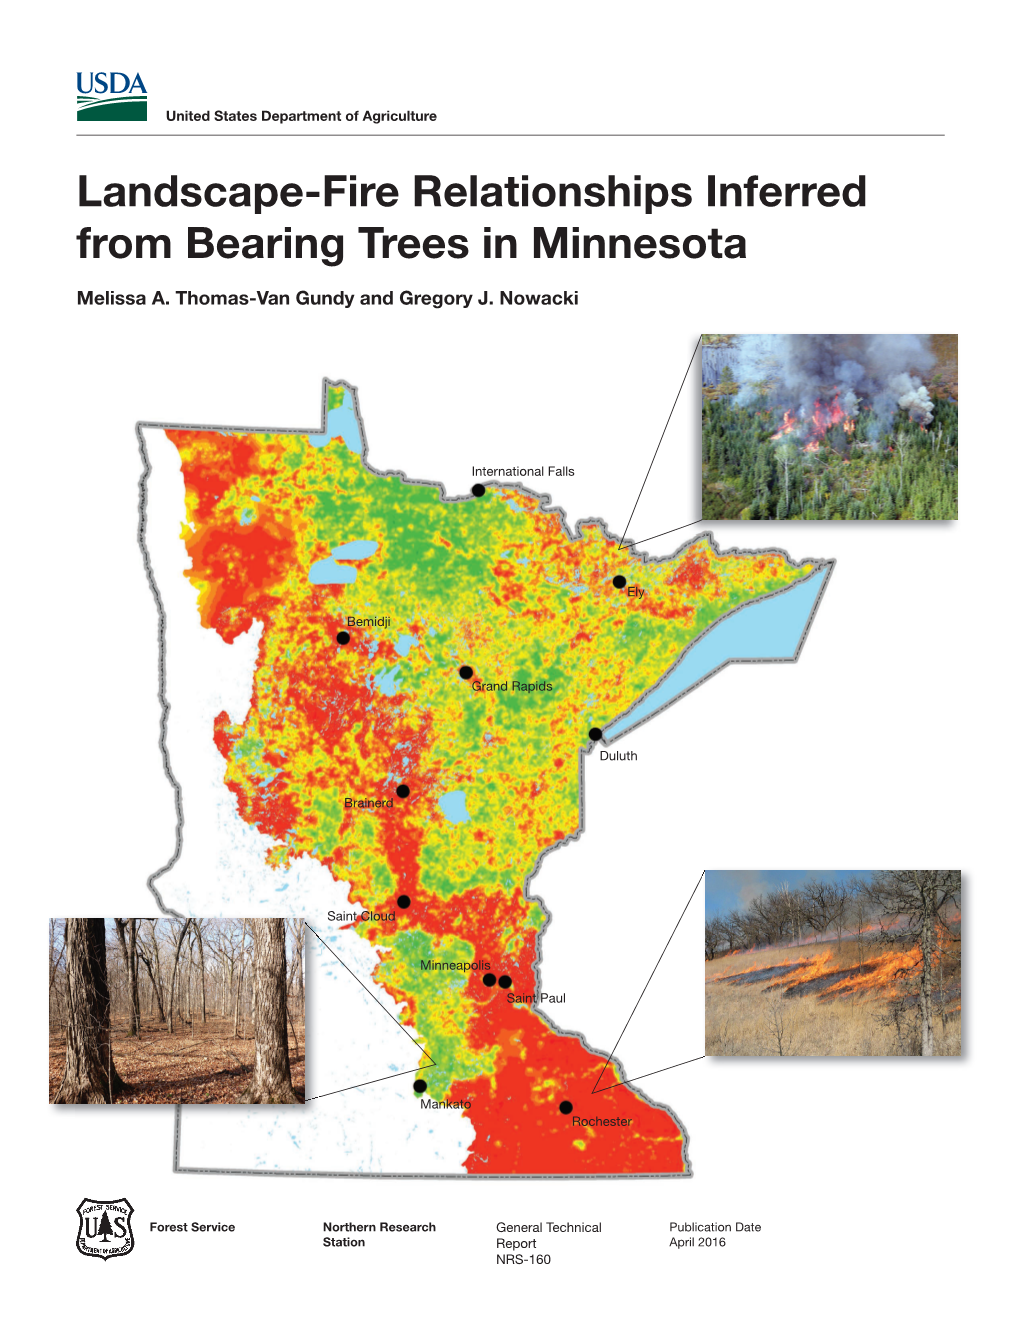 Landscape-Fire Relationships Inferred from Bearing Trees in Minnesota